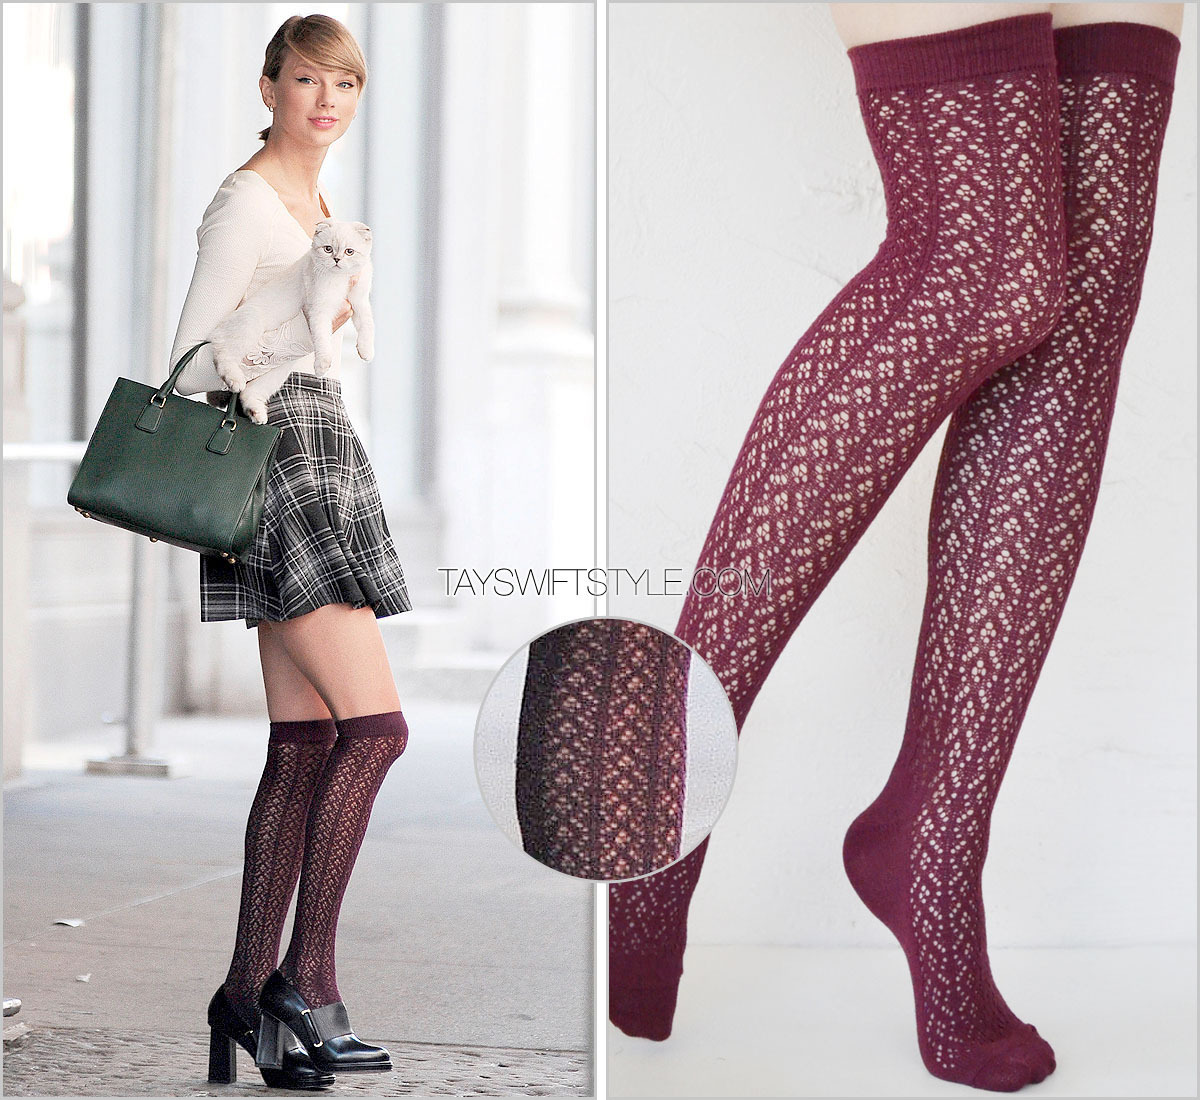 Anyone into Taylor swift wearing socks ? Is there a sub like that? :  r/TaylorSwiftsFeet